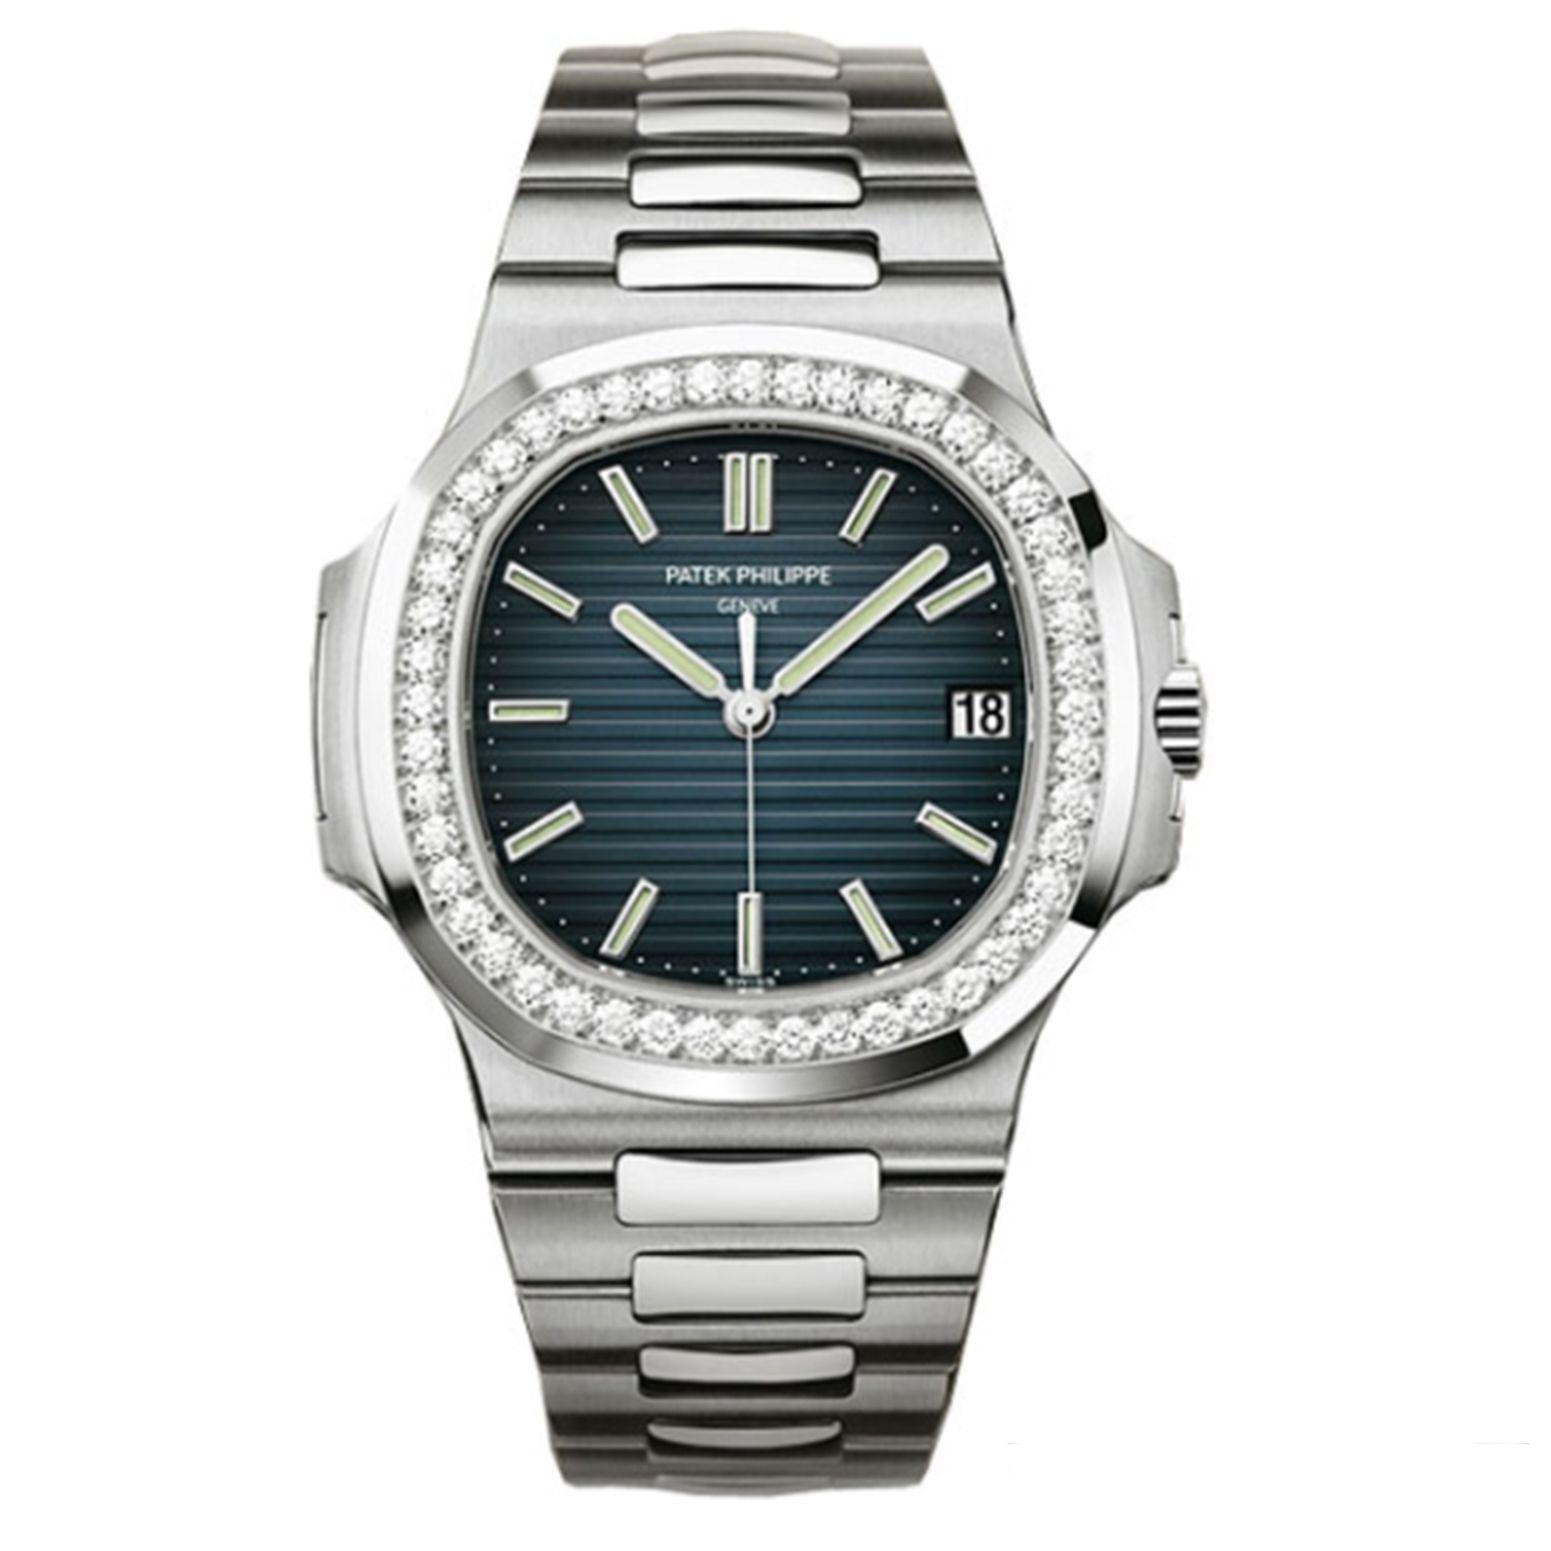 18 carat white gold case with a 18 carat white gold bracelet. Fixed-diamond set bezel. Blue dial with silver tone hands and index hour markers. 18 carat white gold case with a 18 carat white gold bracelet. Fixed-diamond set bezel. Blue dial with